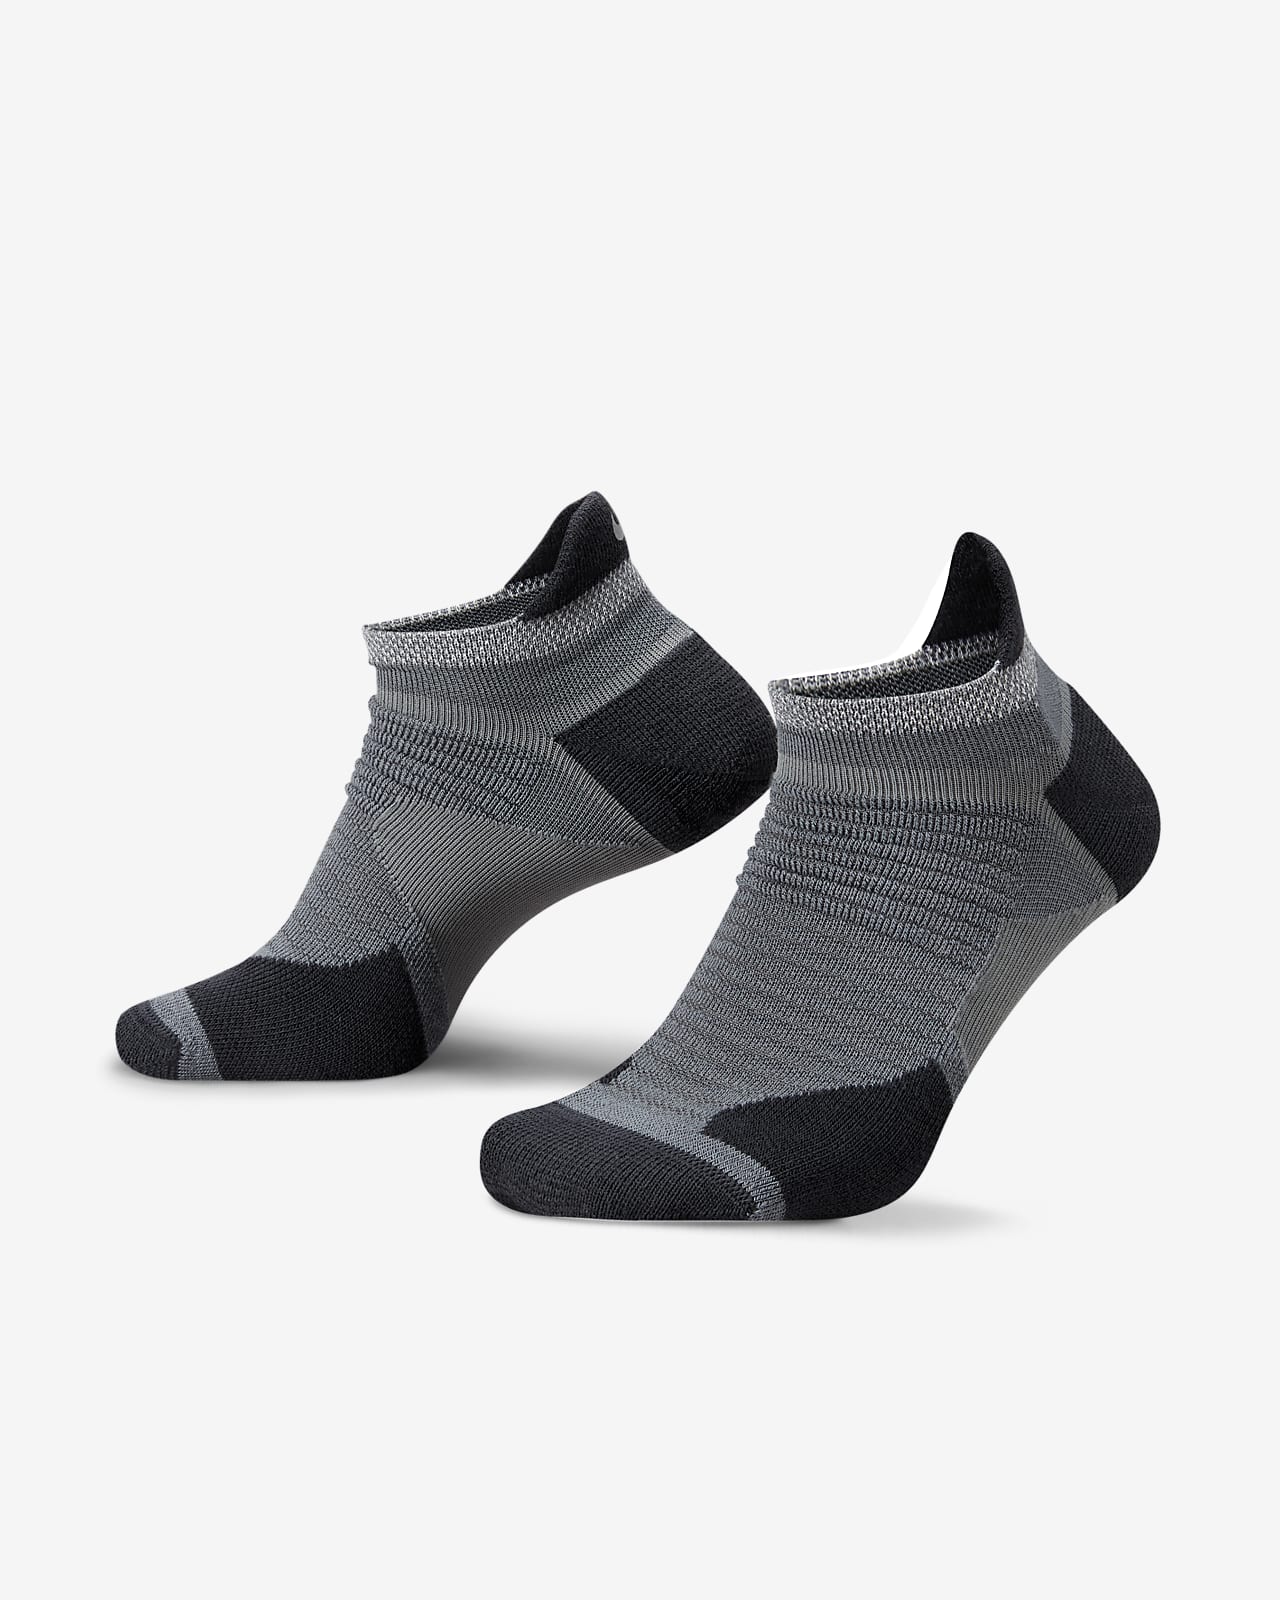 Chaussettes de running invisibles Nike Spark Wool